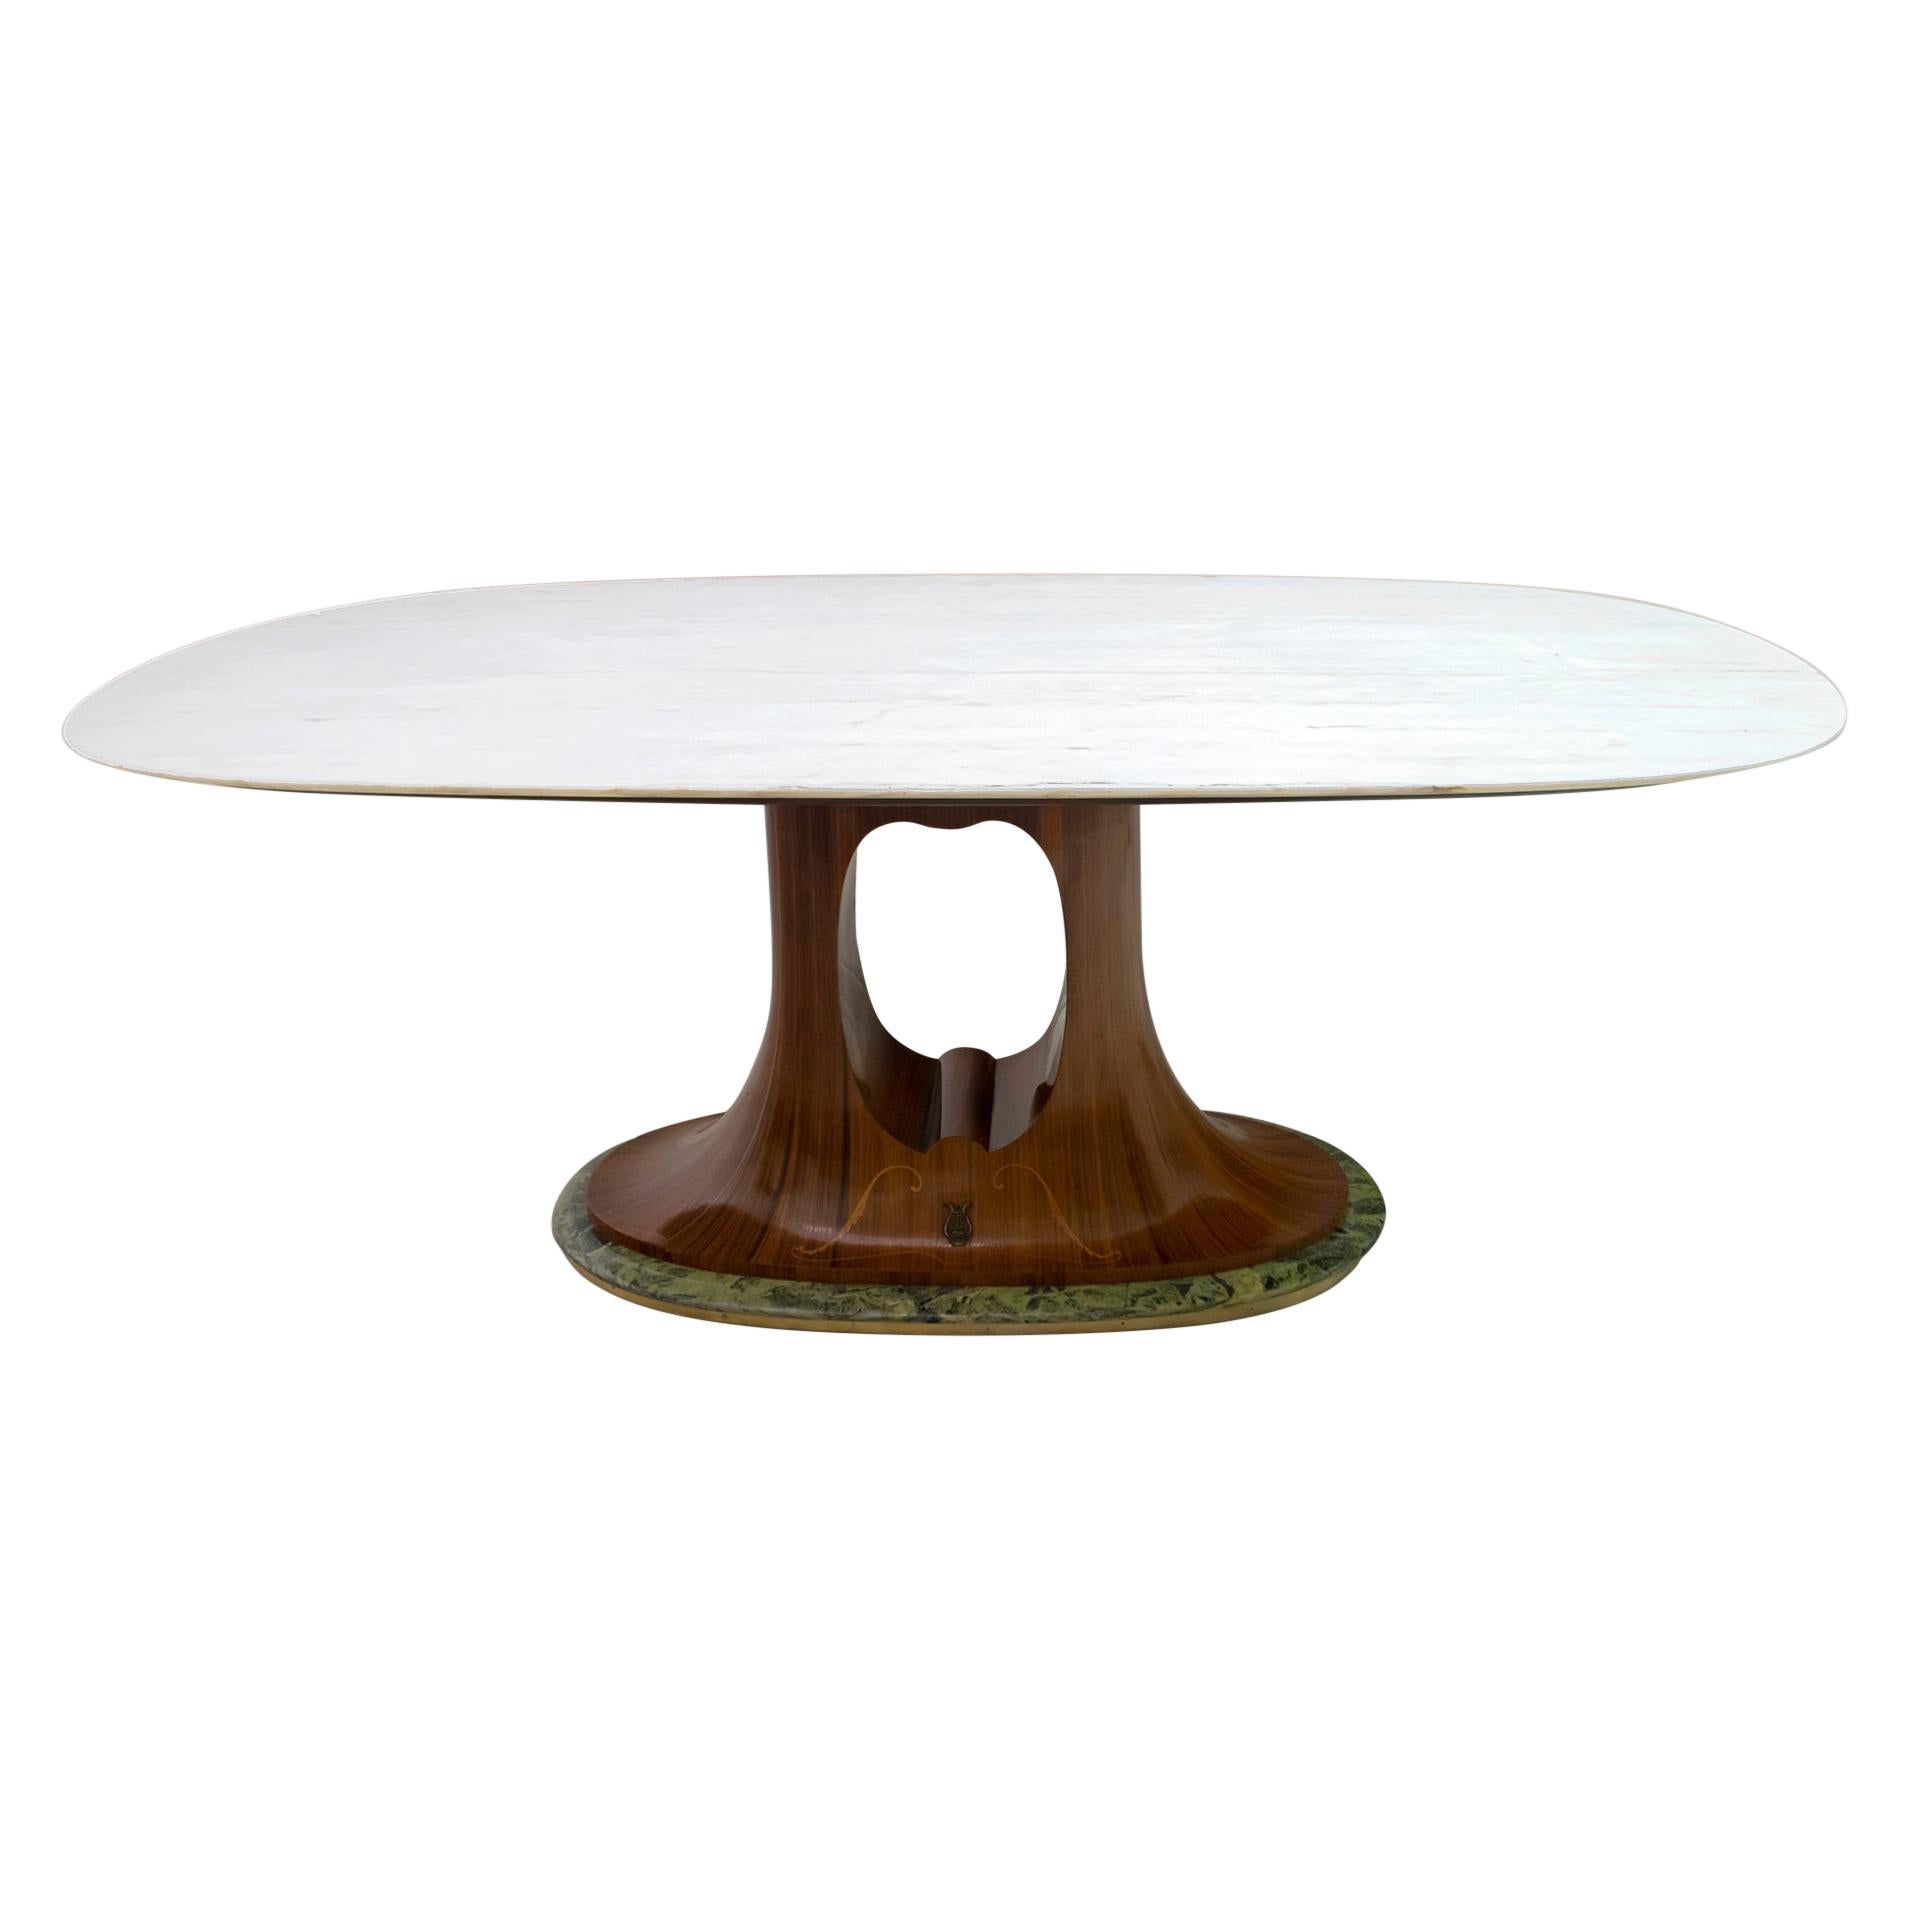 Guglielmo Ulrich Midcentury Italian Marble and Walnut Dining Table, 1950s